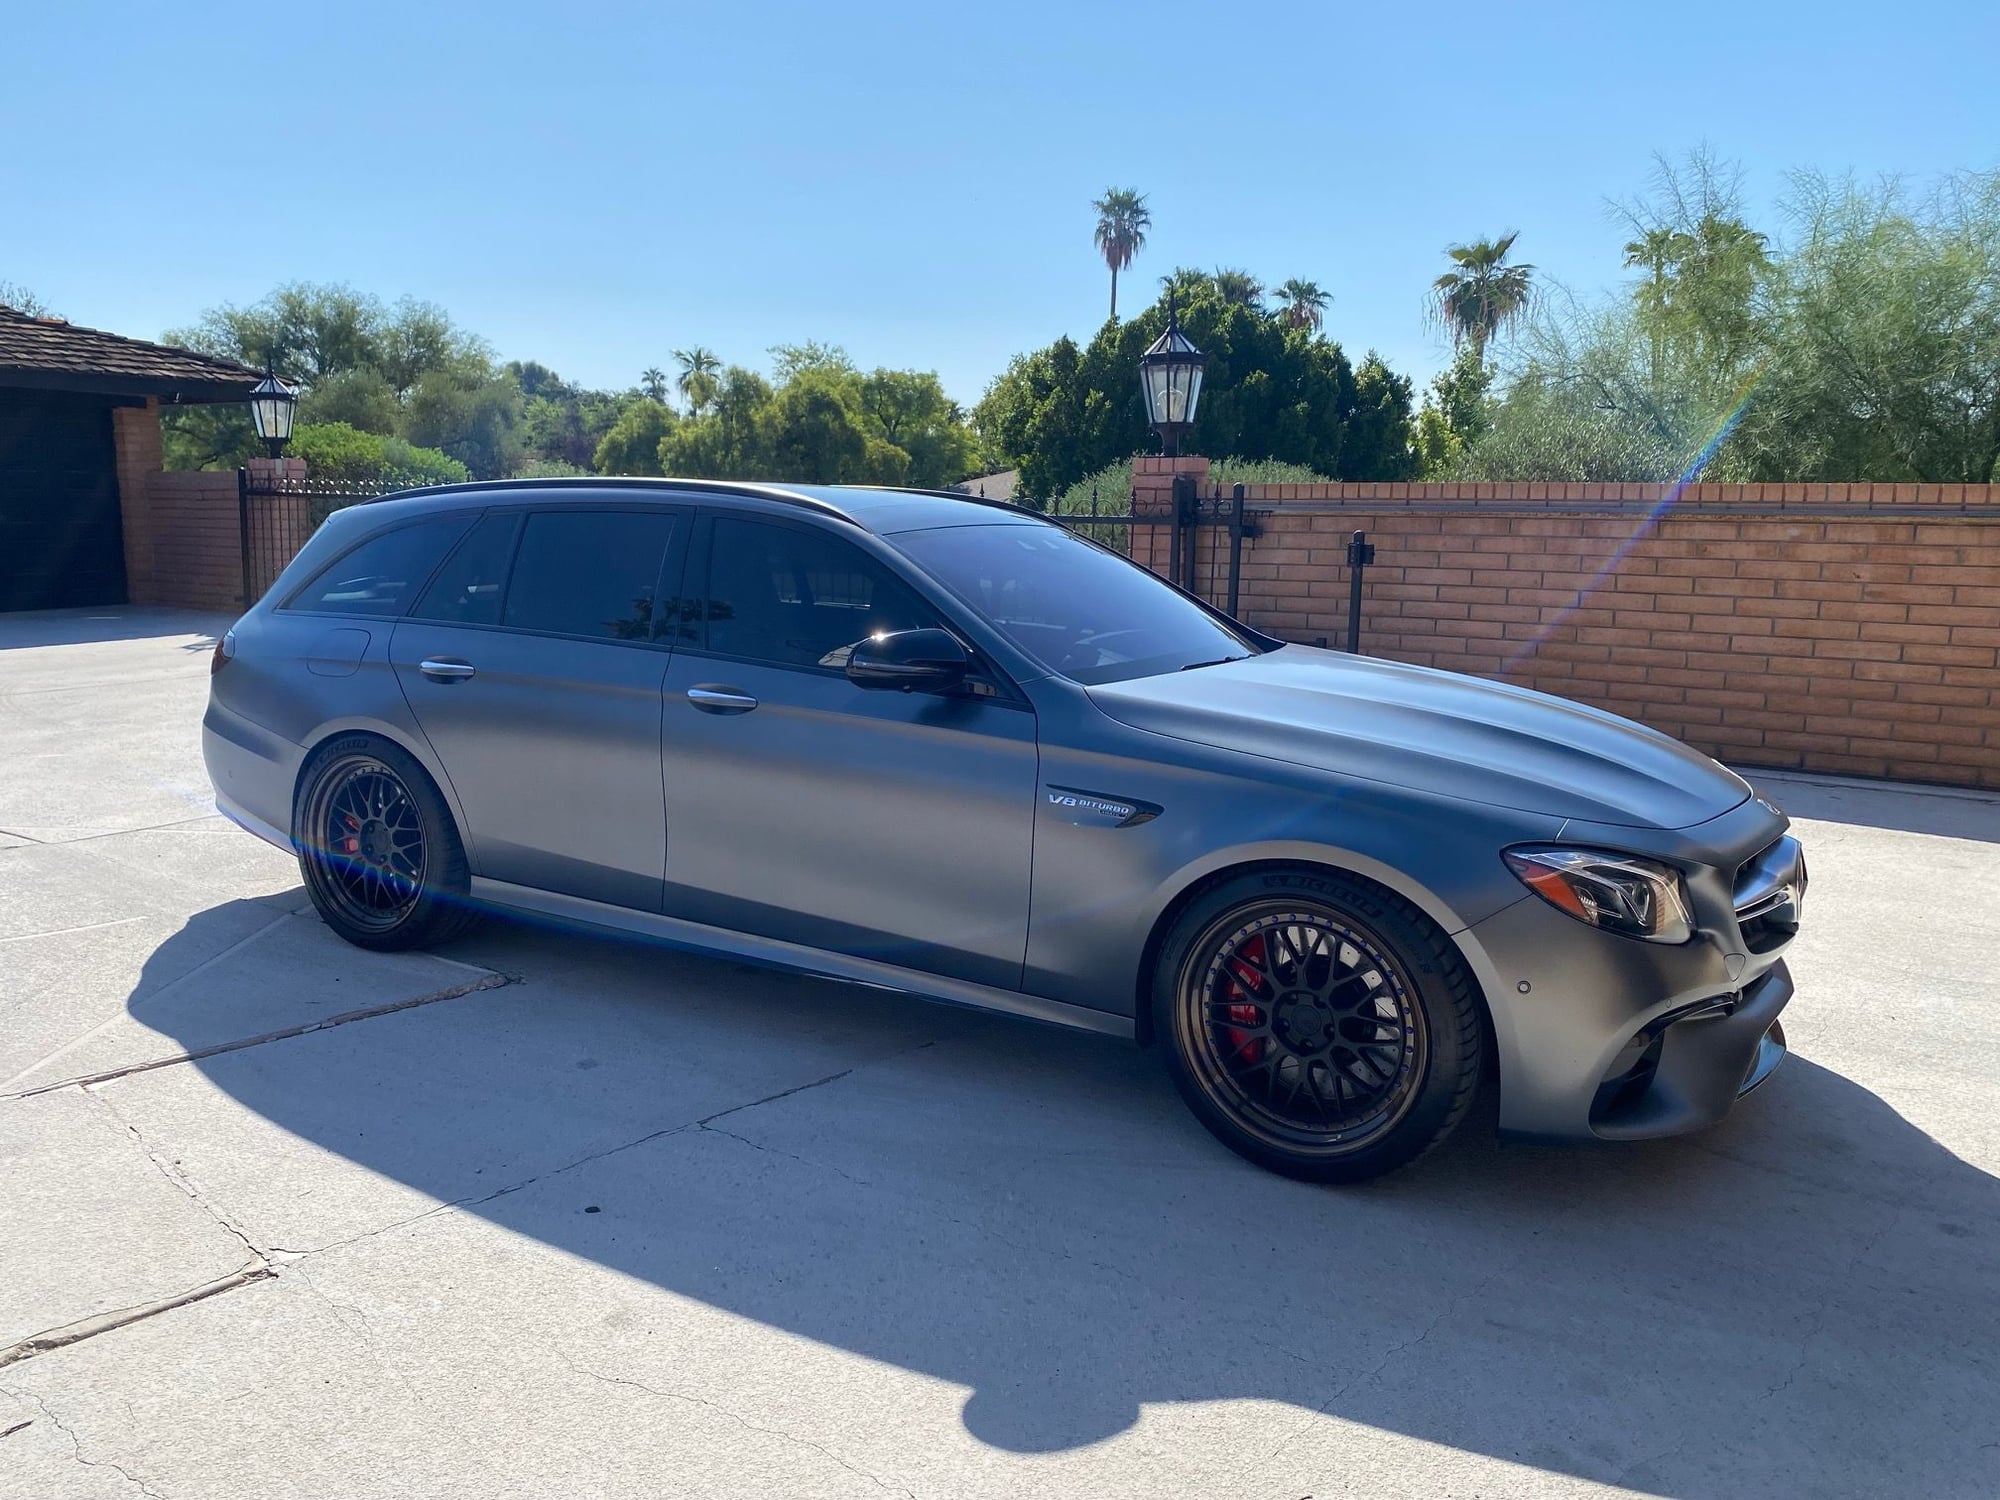 2018 - 2021 Mercedes-Benz E63 AMG S - WTB: 2018+ E63s wagon // PRIVATE SELLER ONLY! - Used - 30,000 Miles - Scottsdale, AZ 85255, United States